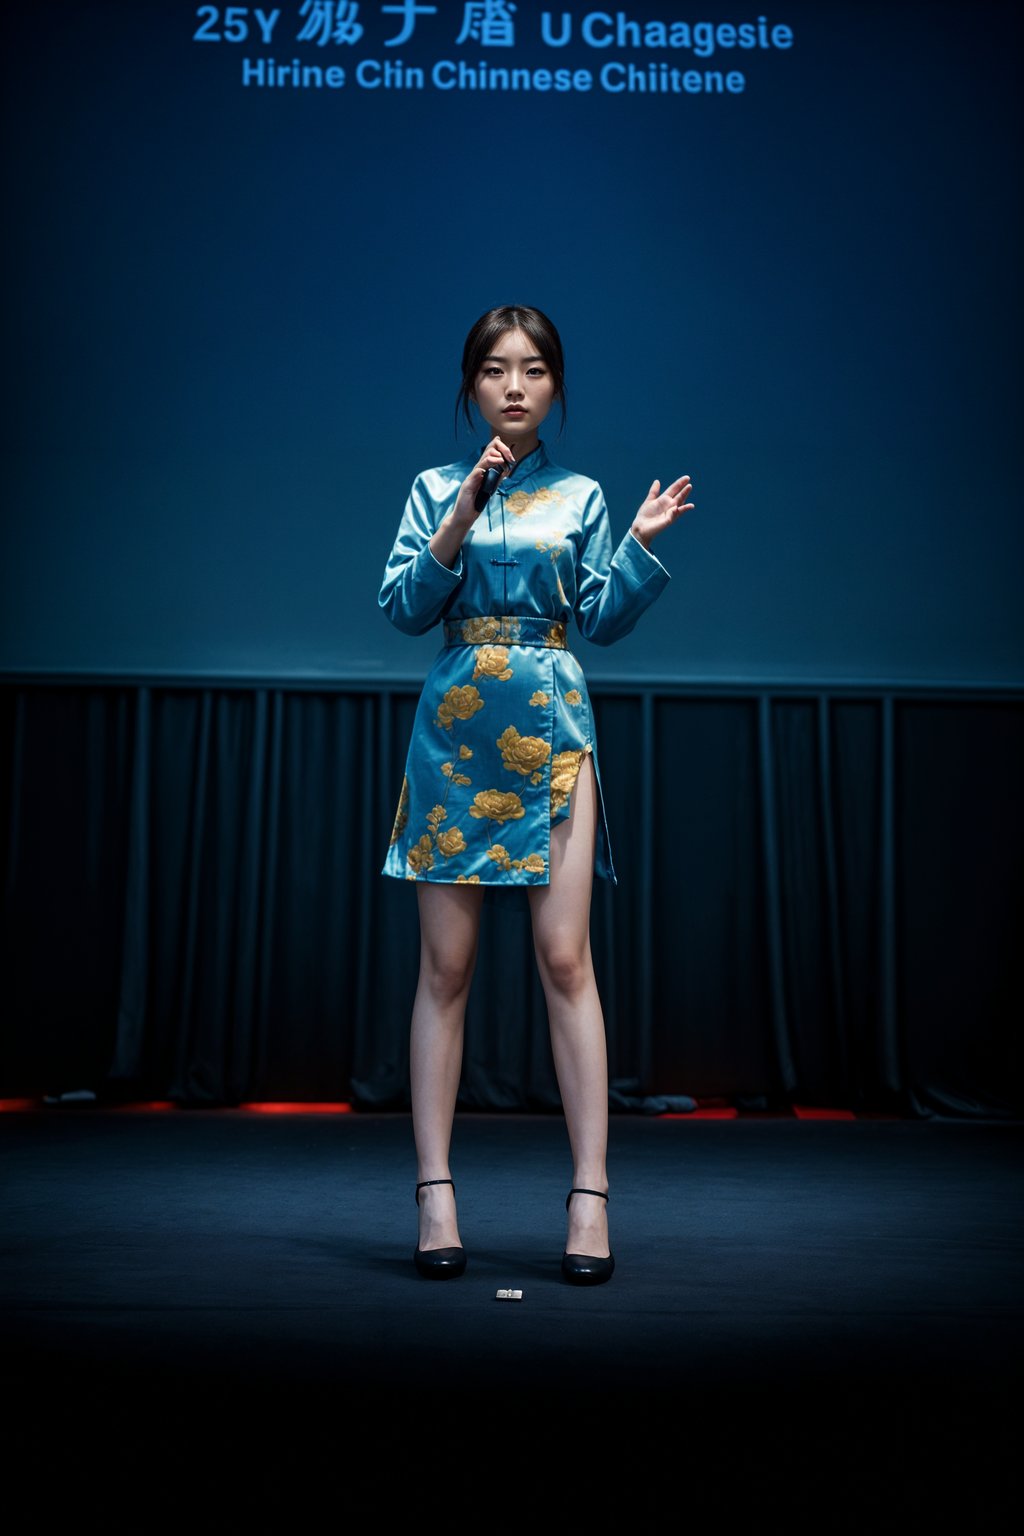 woman as a conference keynote speaker standing on stage at a conference